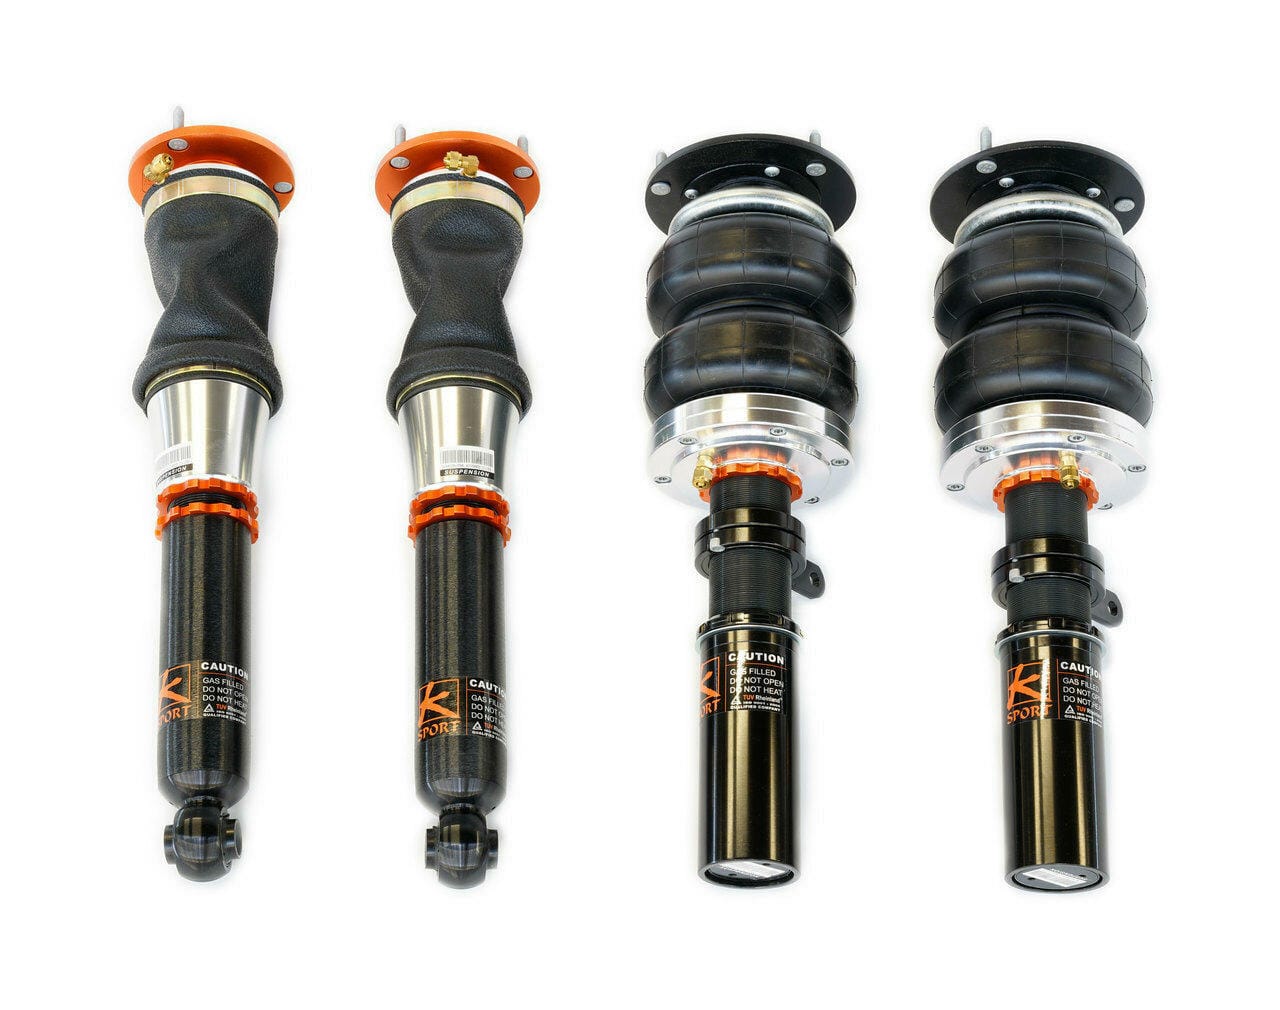 Ksport Airtech Air Suspension System (Struts Only) - 1995-2001 BMW 7 Series 6 Cyl. Excl. OEM Air Suspension Models (E38) CBM280-ASO